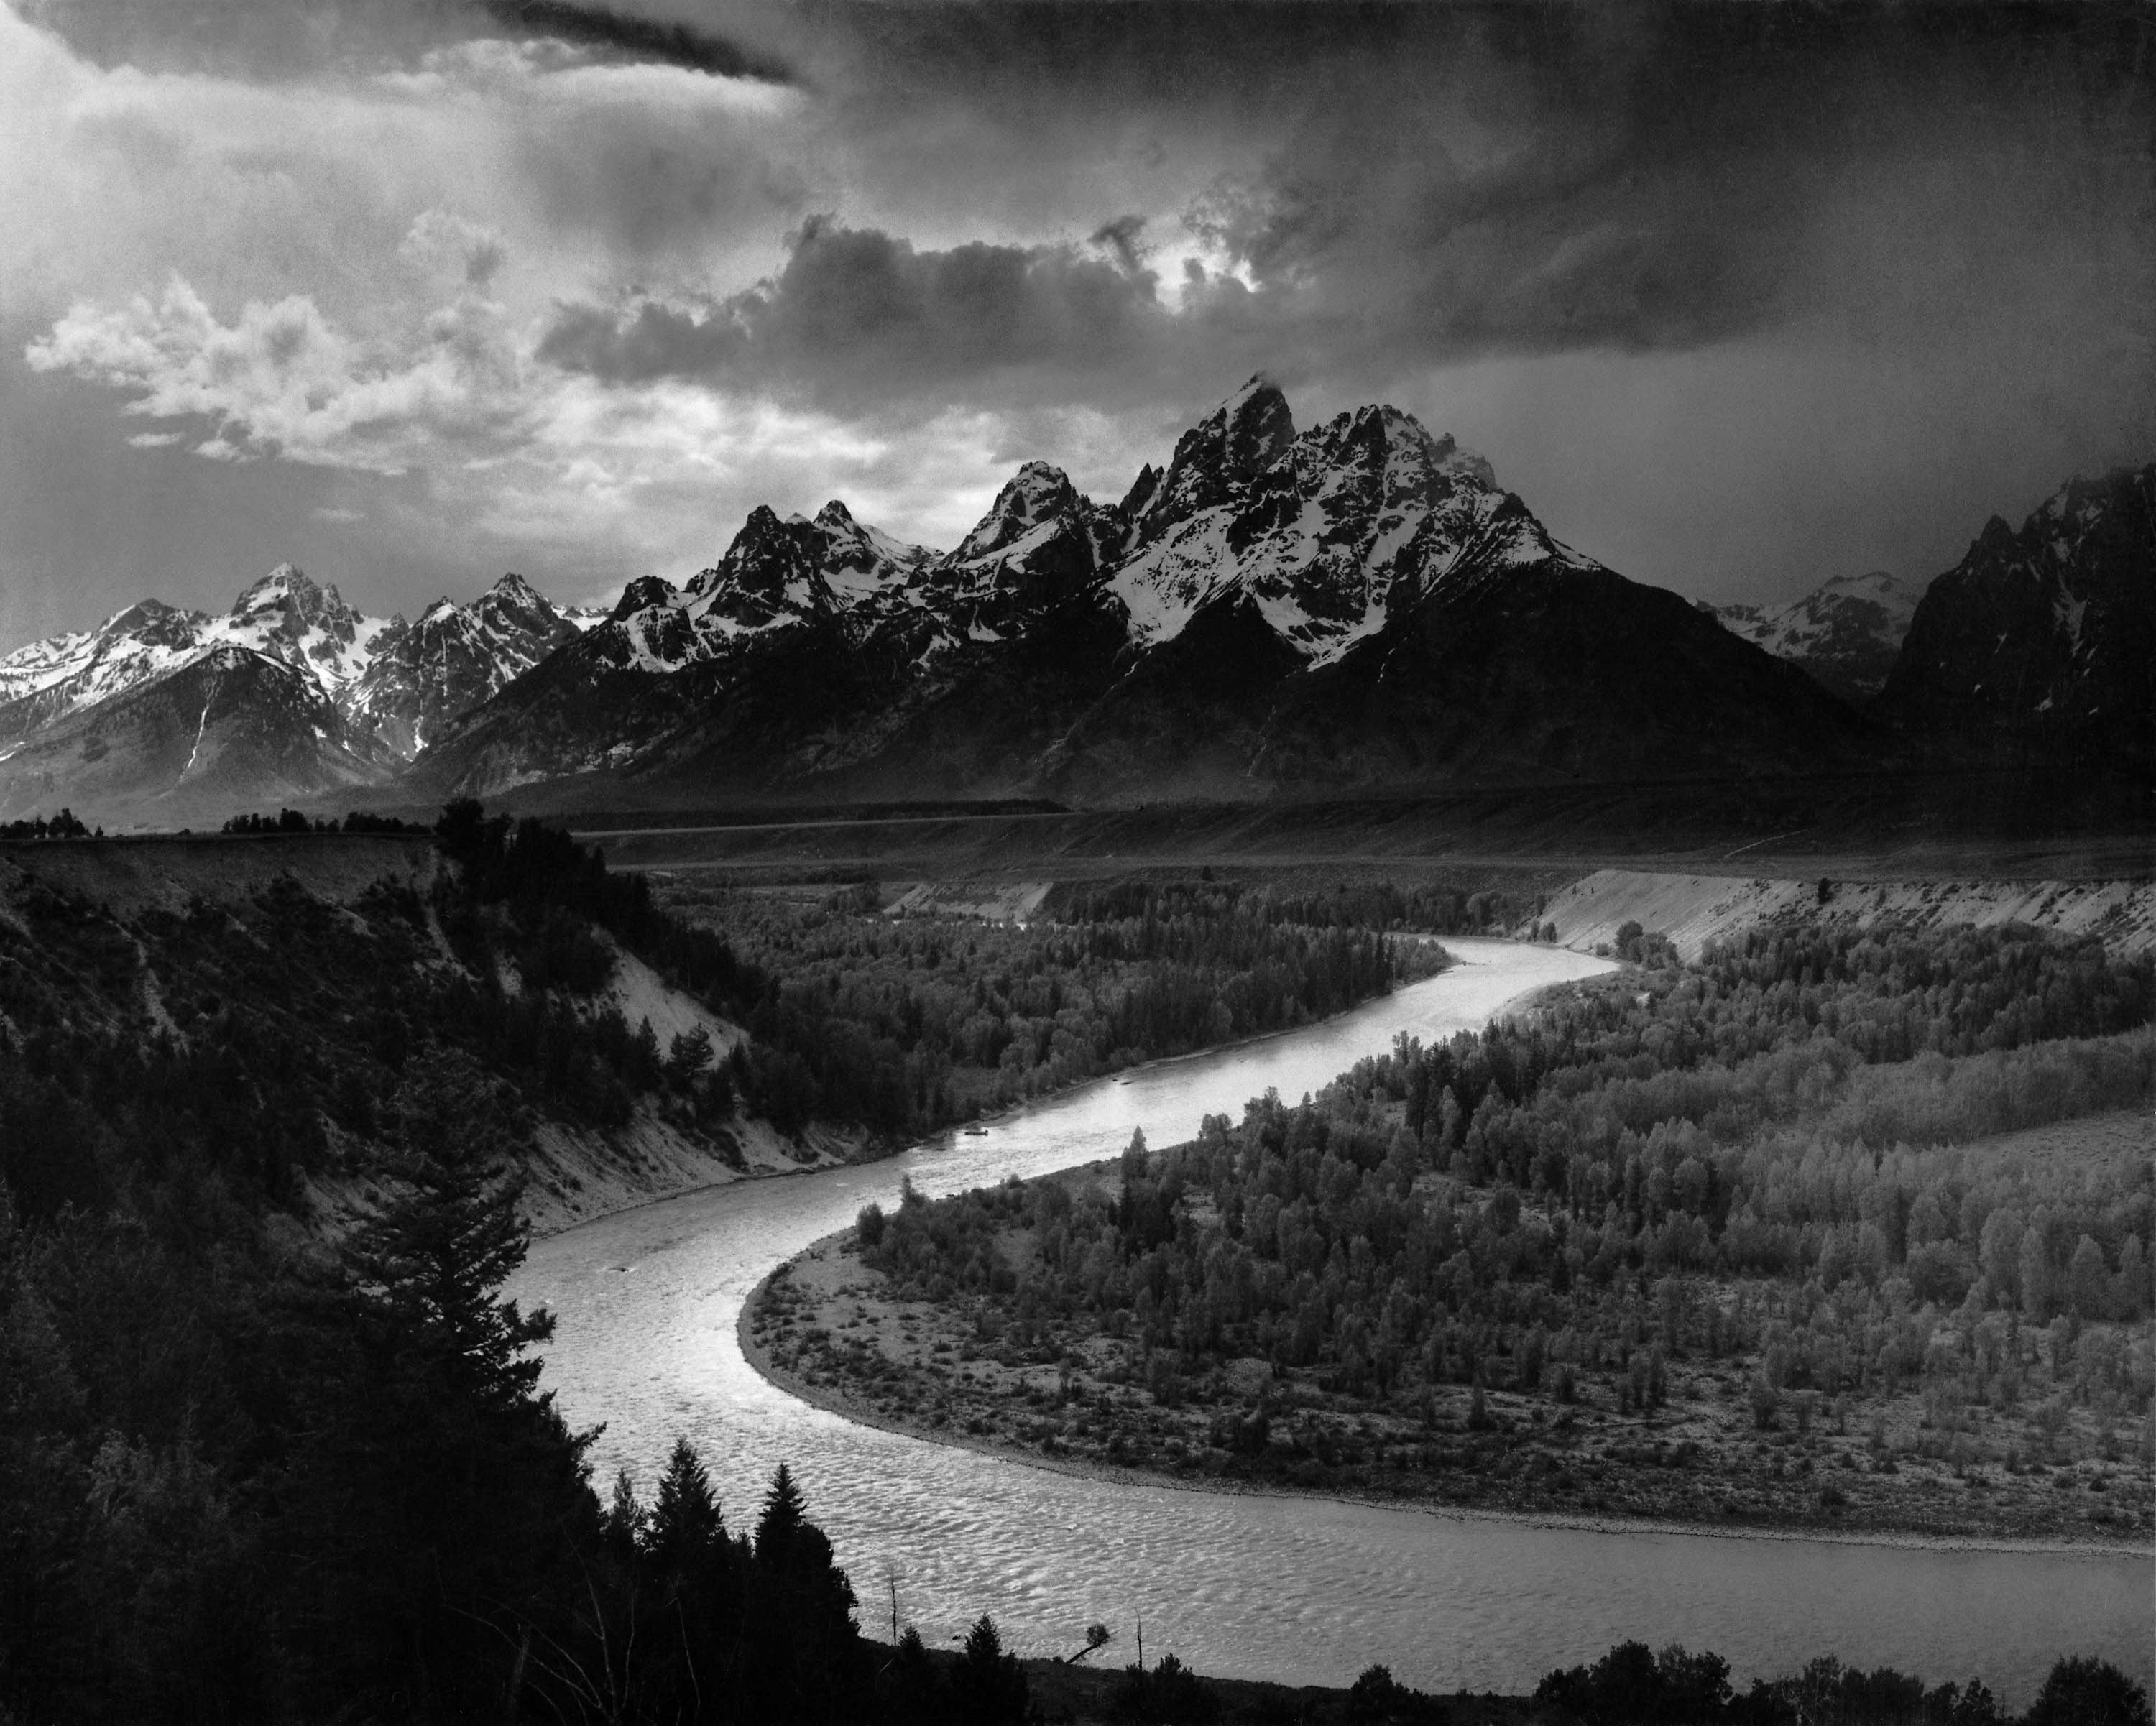 The Snake River and Tetons mountain range in Wyoming, US. File from Wikimedia Commons.